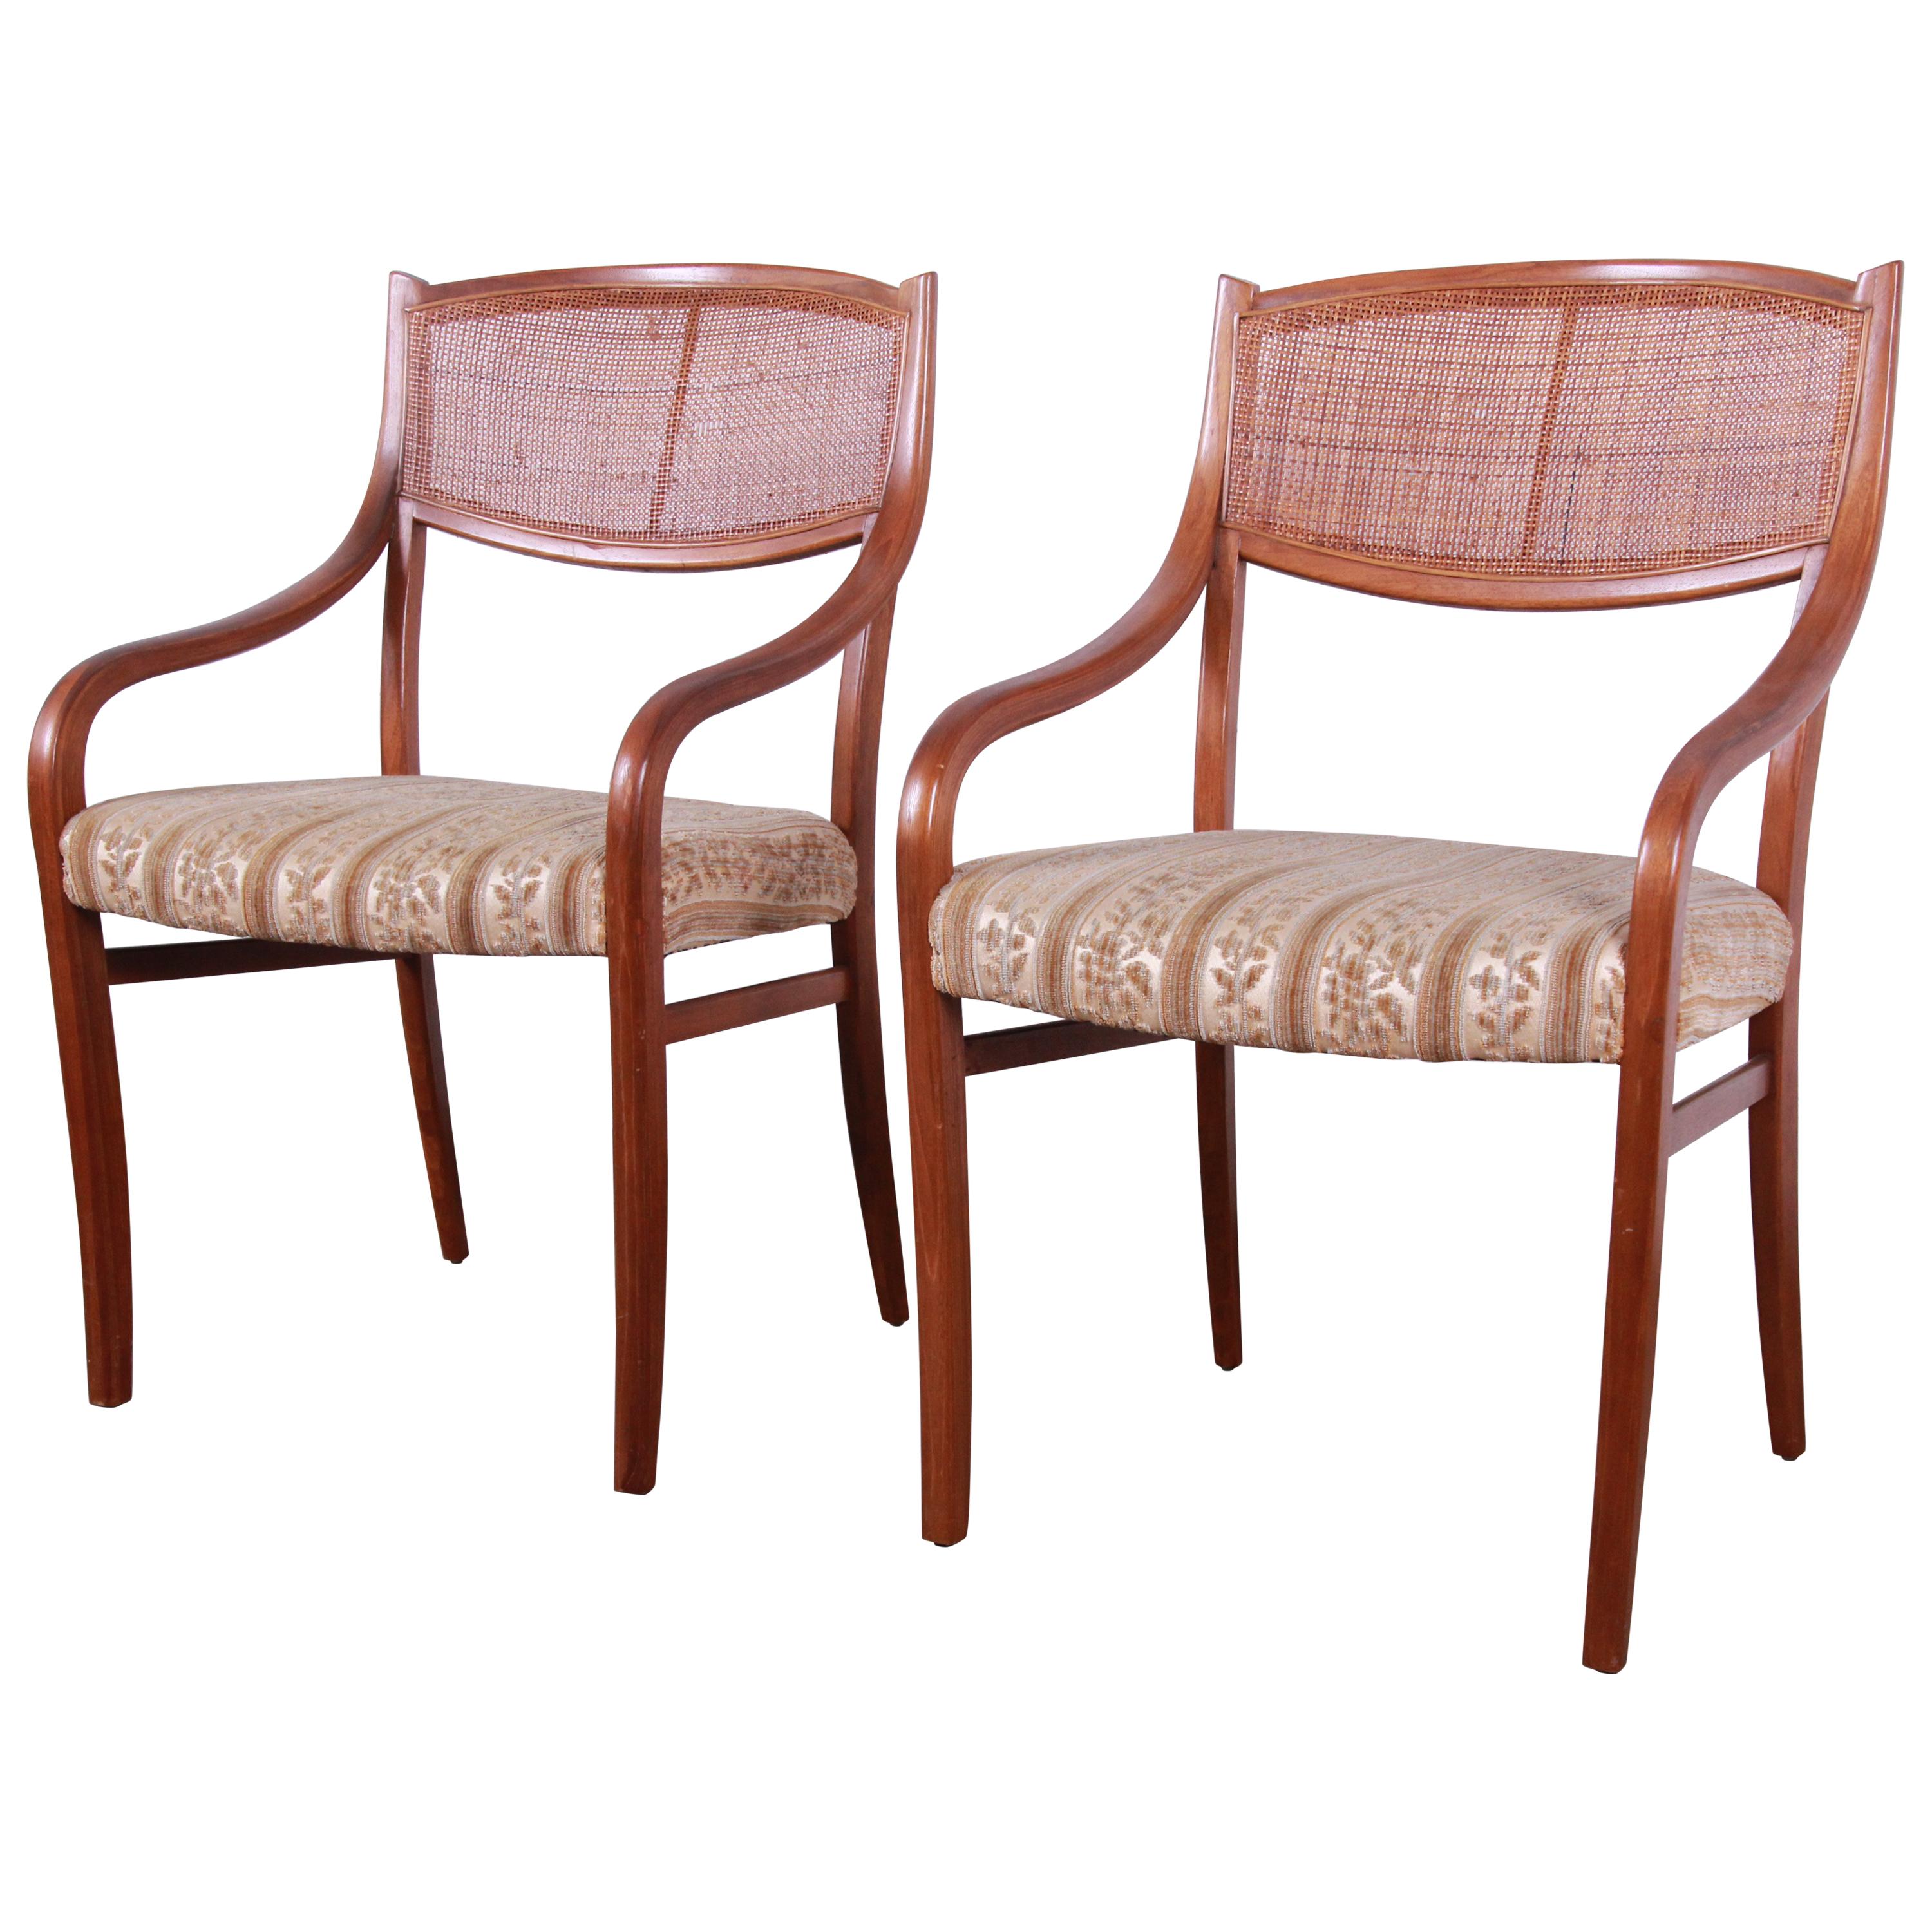 Barney Flagg for Drexel Parallel Walnut and Cane Armchairs, Pair